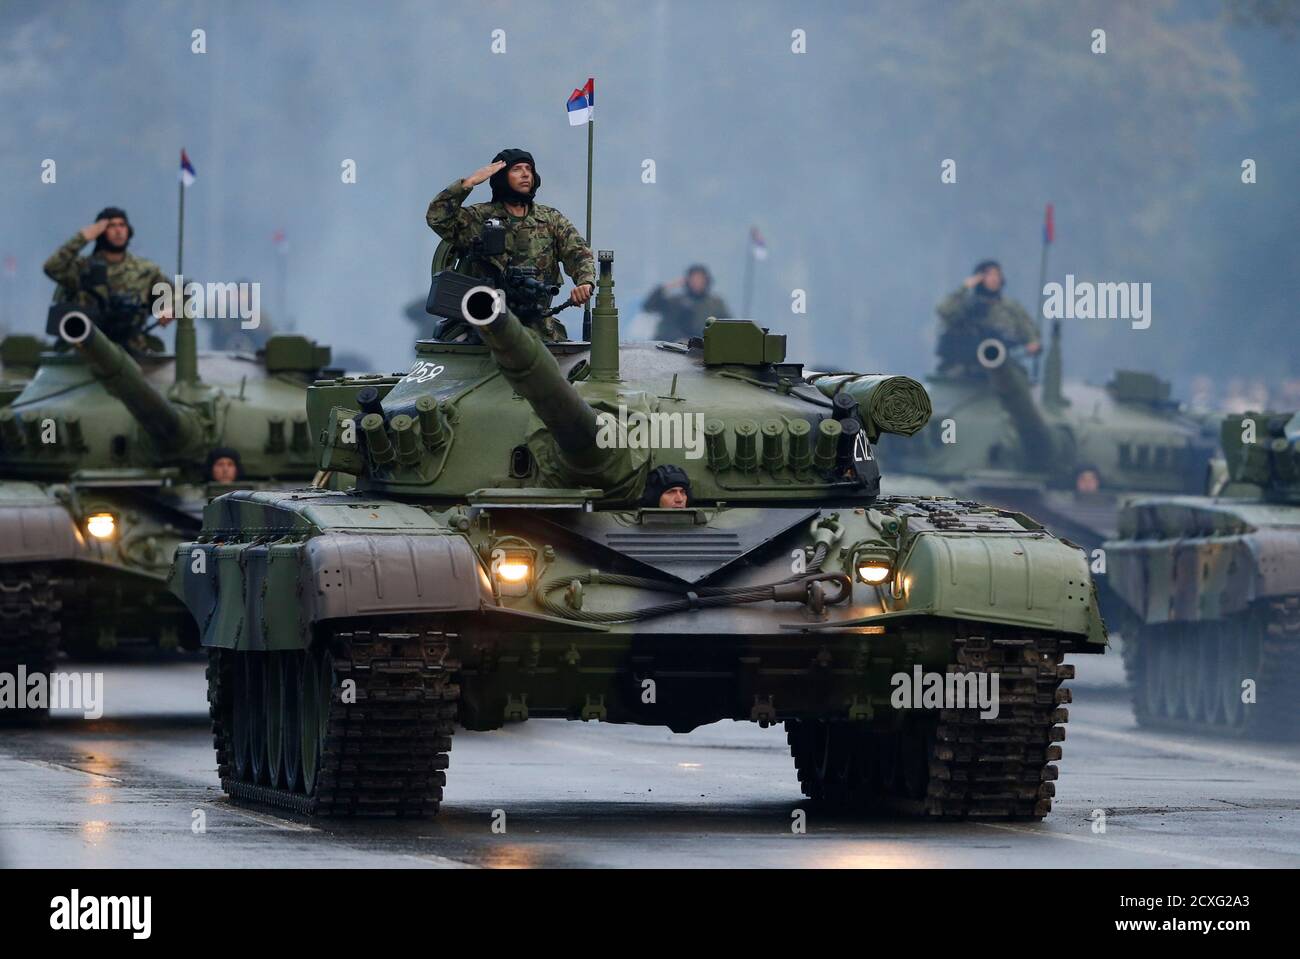 Serbian troops salute from the top of their tanks during a military parade  to mark 70 years since the city's liberation by the Red Army in Belgrade  October 16, 2014. Russian President